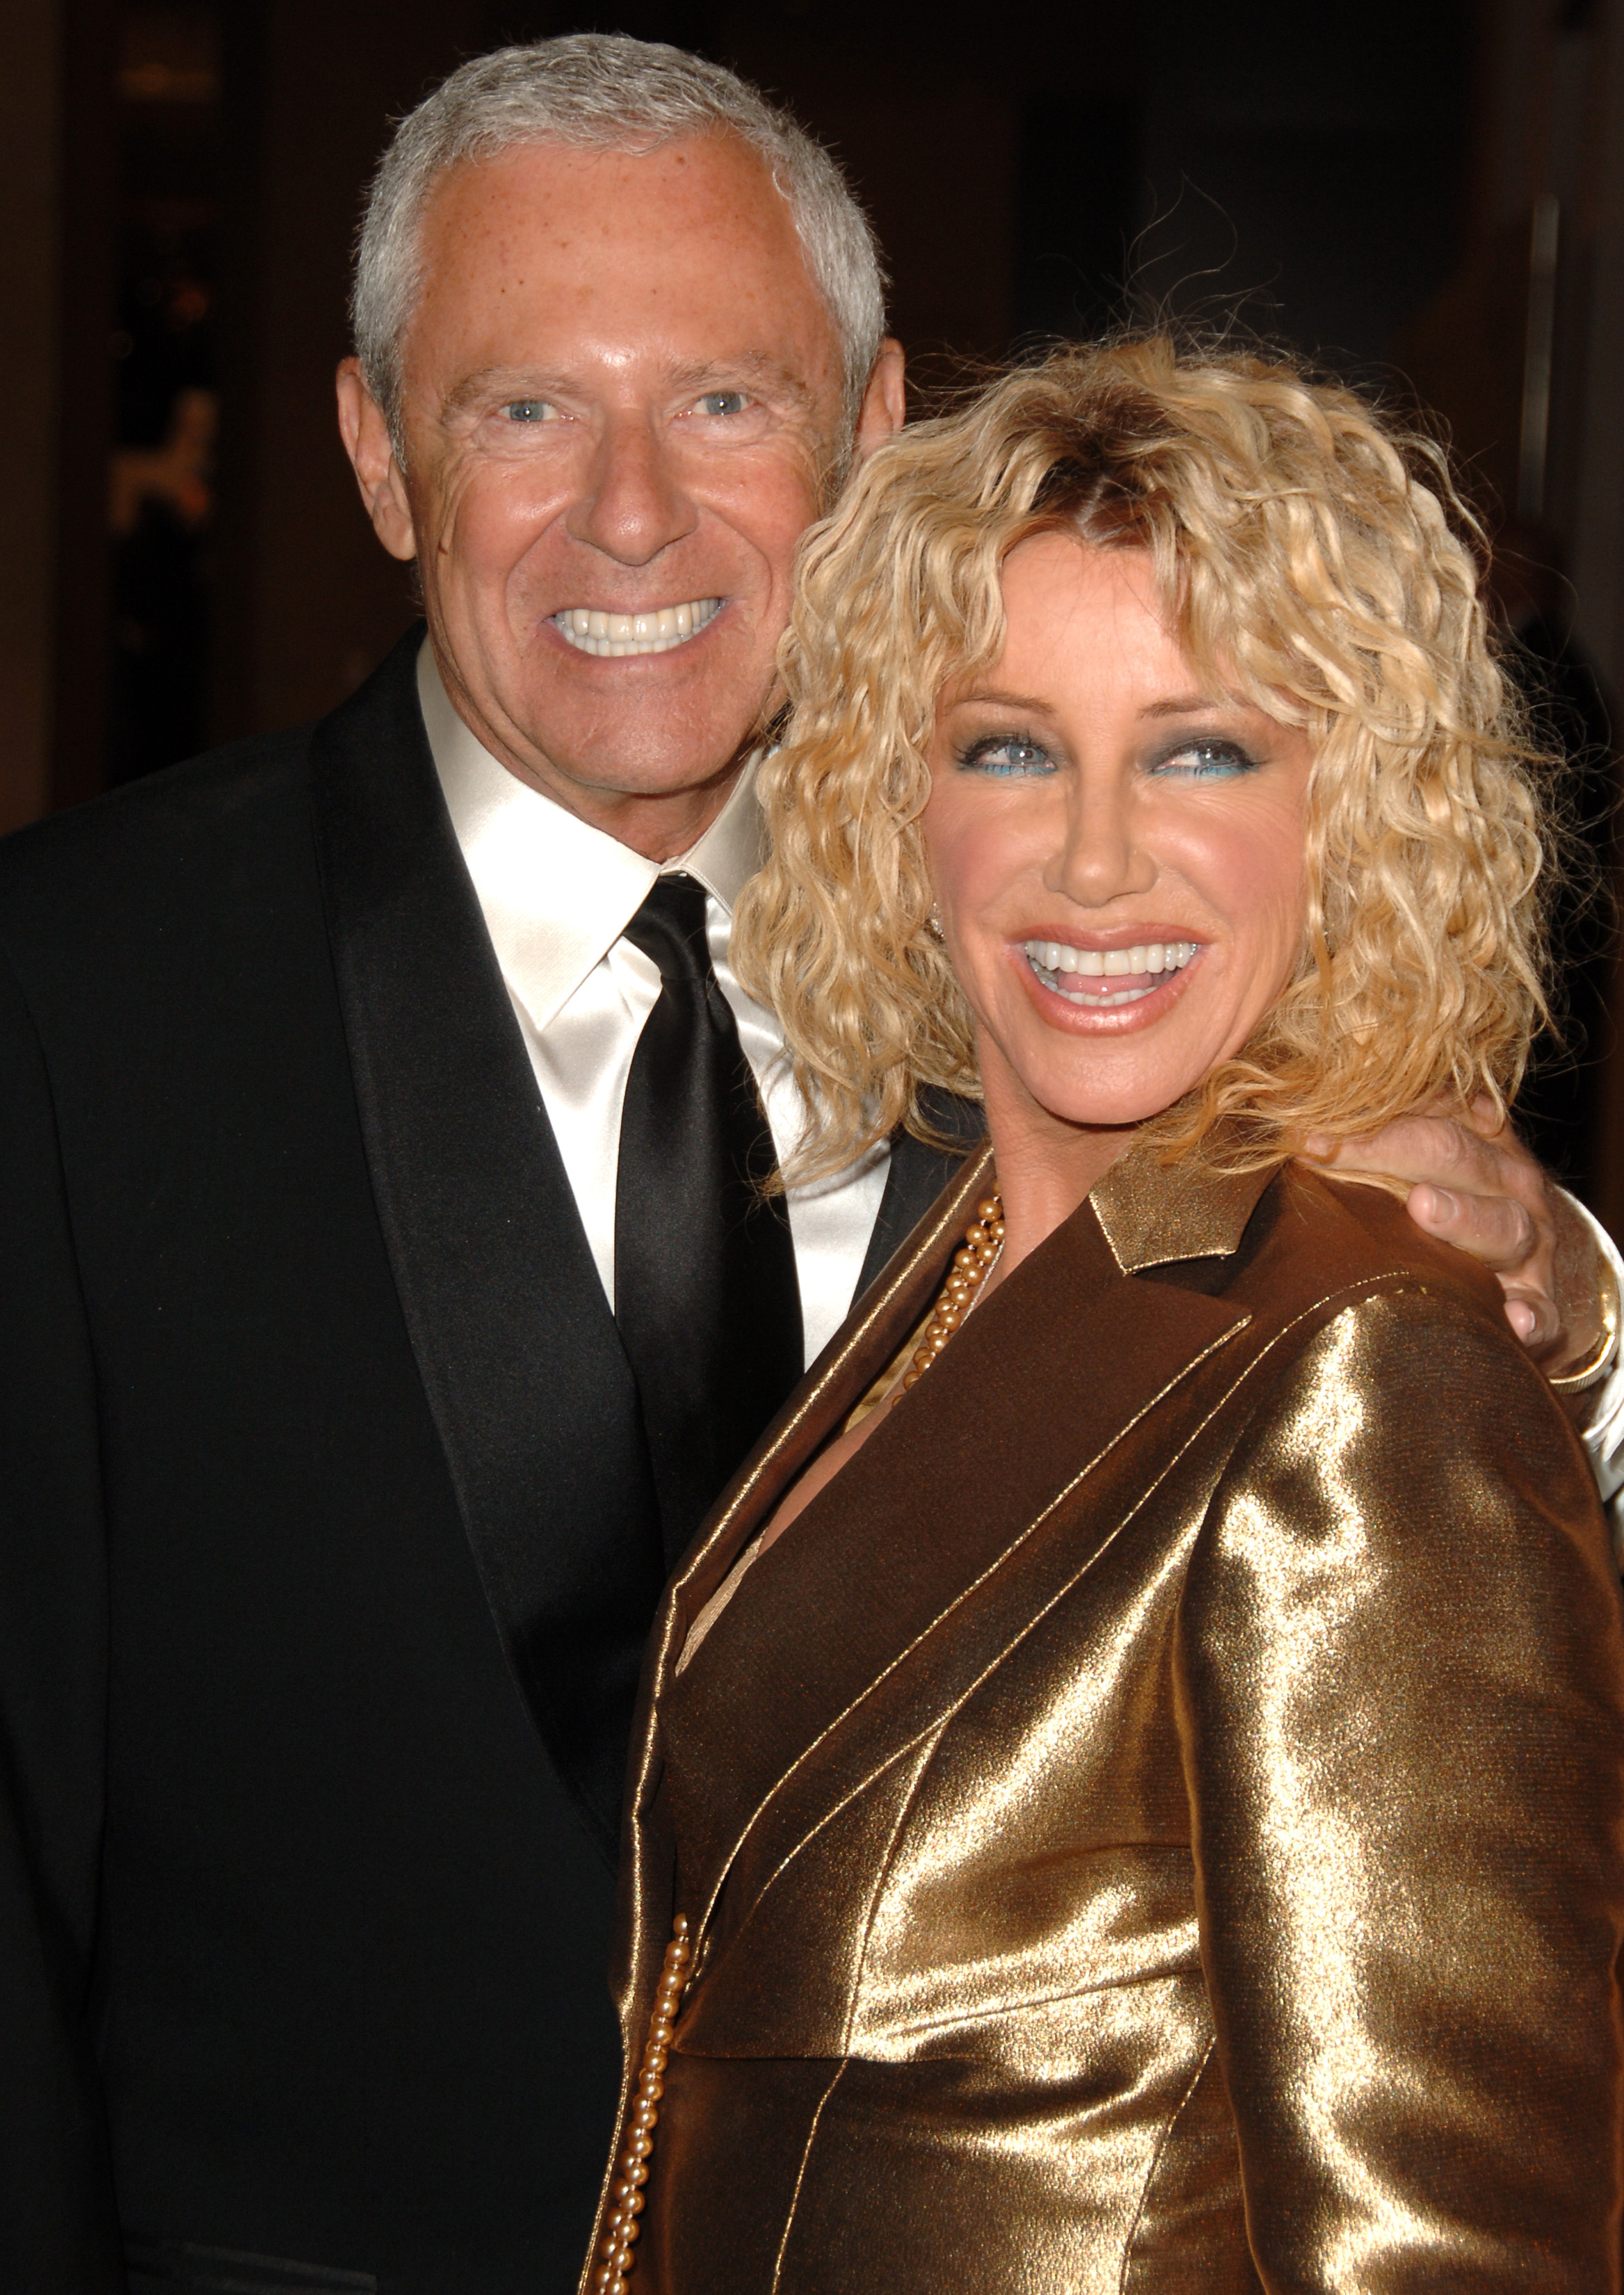 Alan Hamel und Suzanne Somers auf dem Mercedes-Benz Presents the 17th Carousel of Hope Ball | Quelle: Getty Images